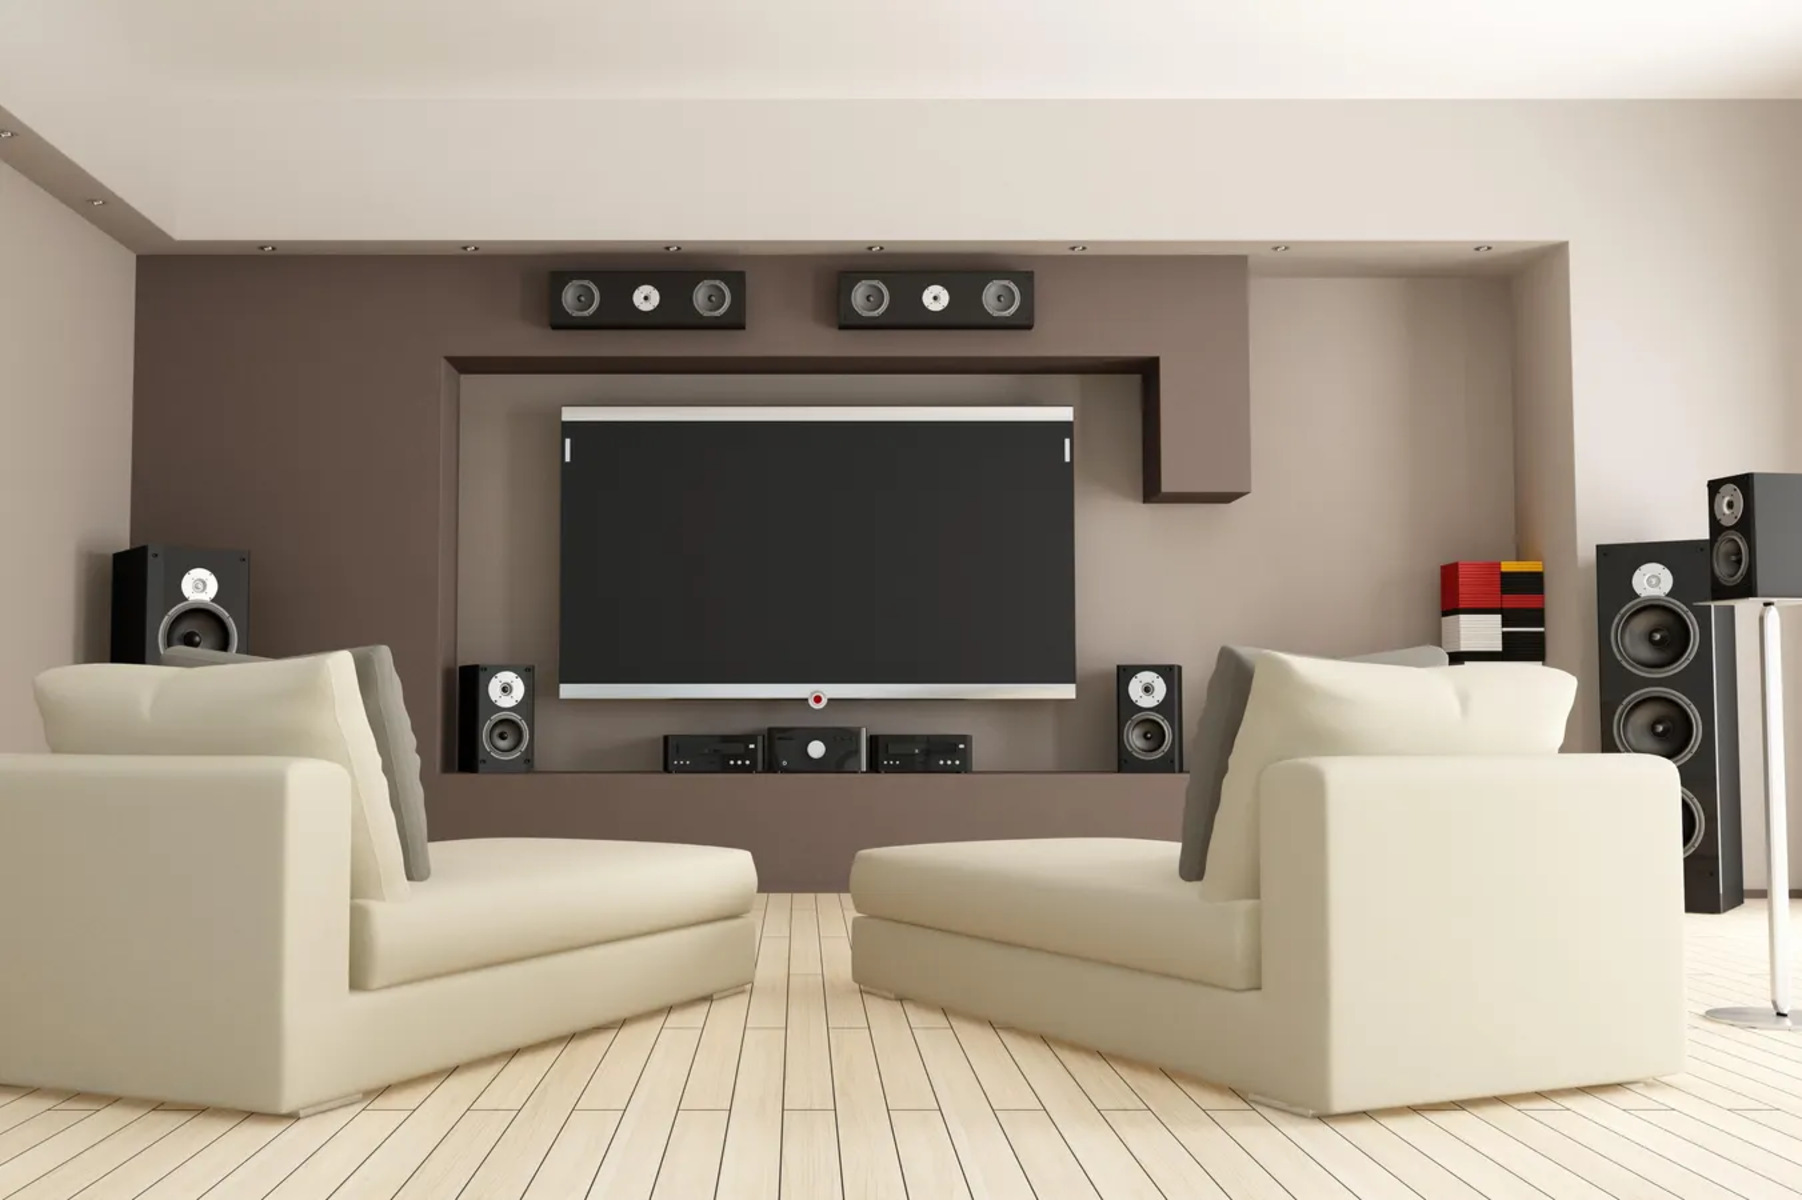 How To Connect A Surround Sound System To A TV